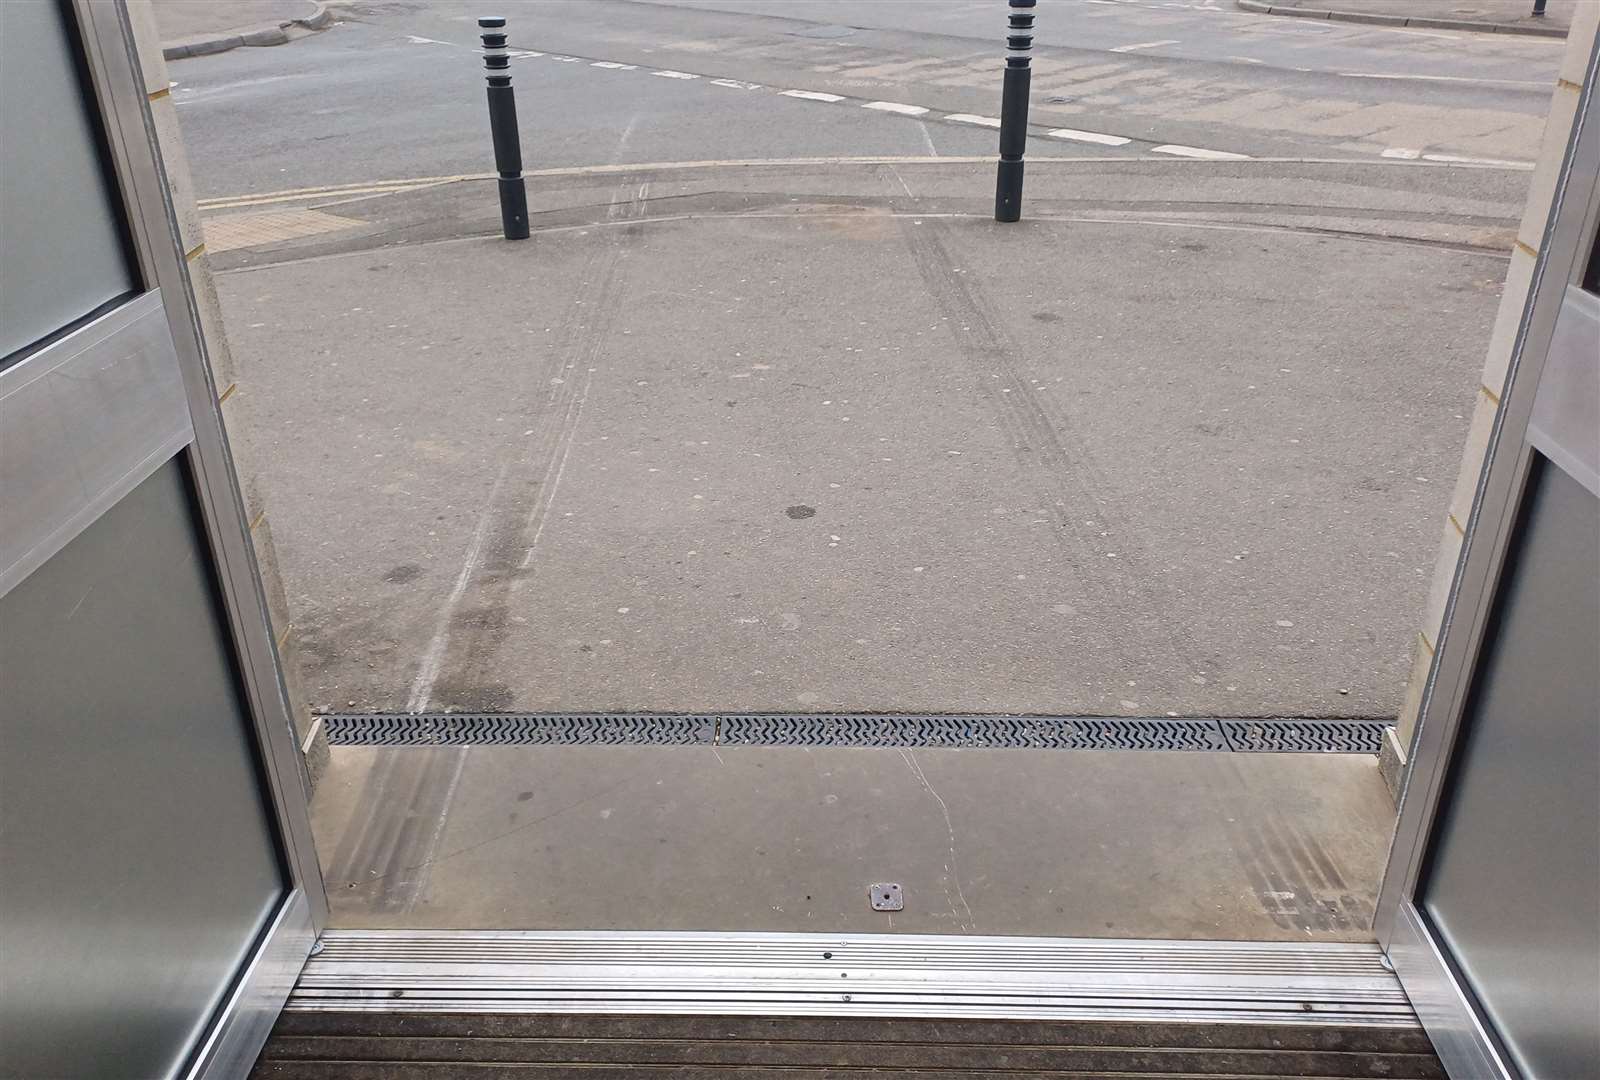 Tire tracks leading straight through the doors of the Londis